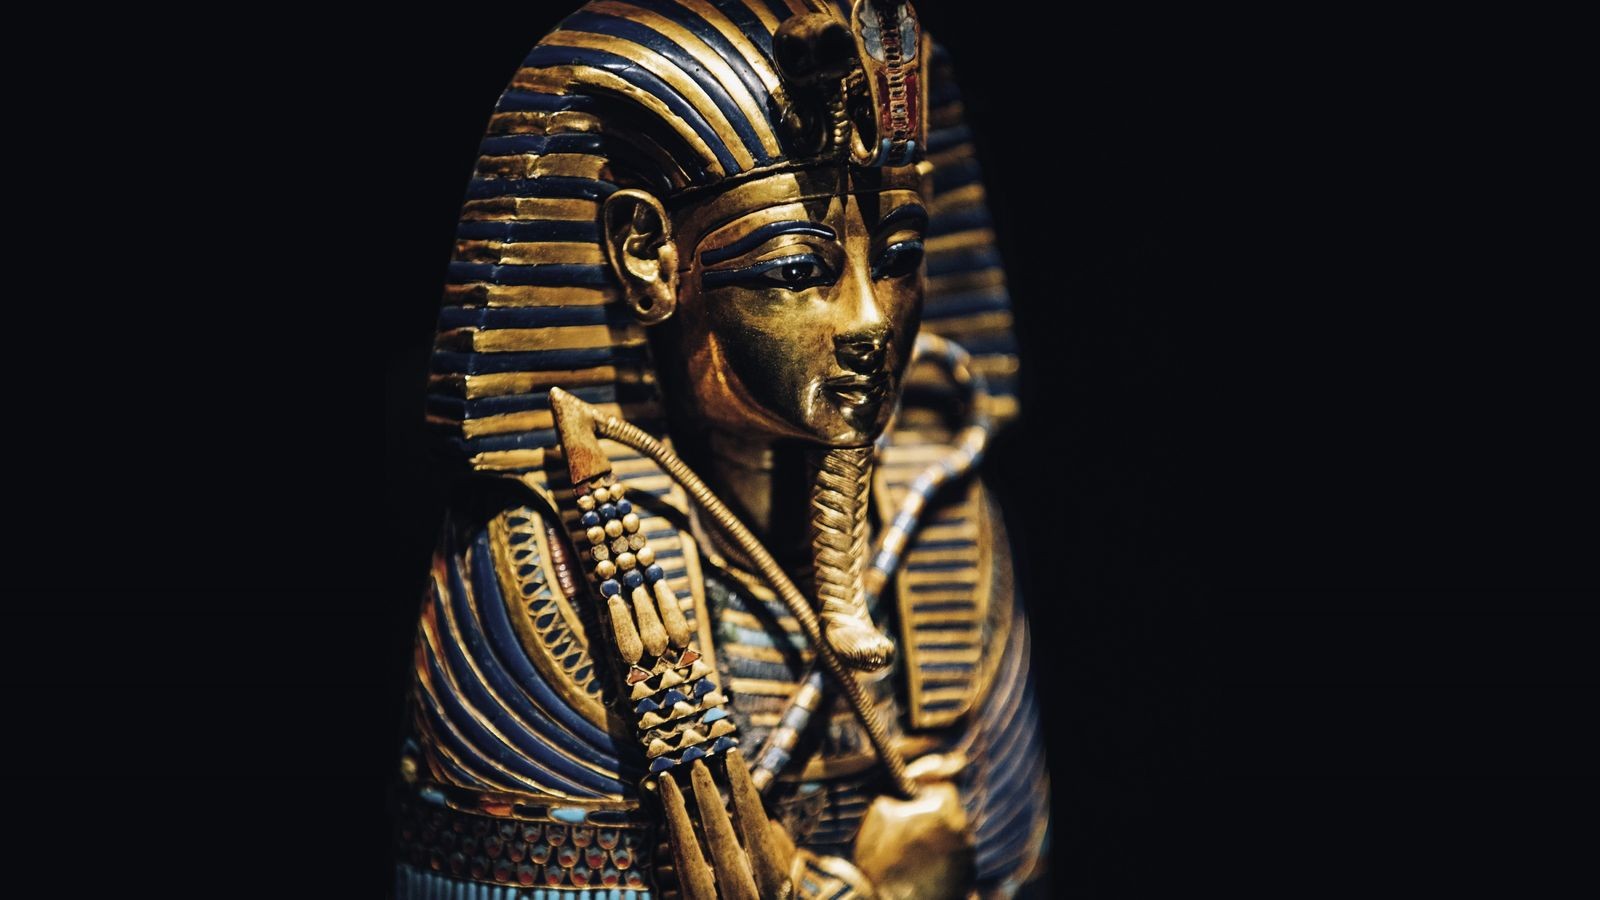 What are 5 facts about King Tutankhamun's tomb?